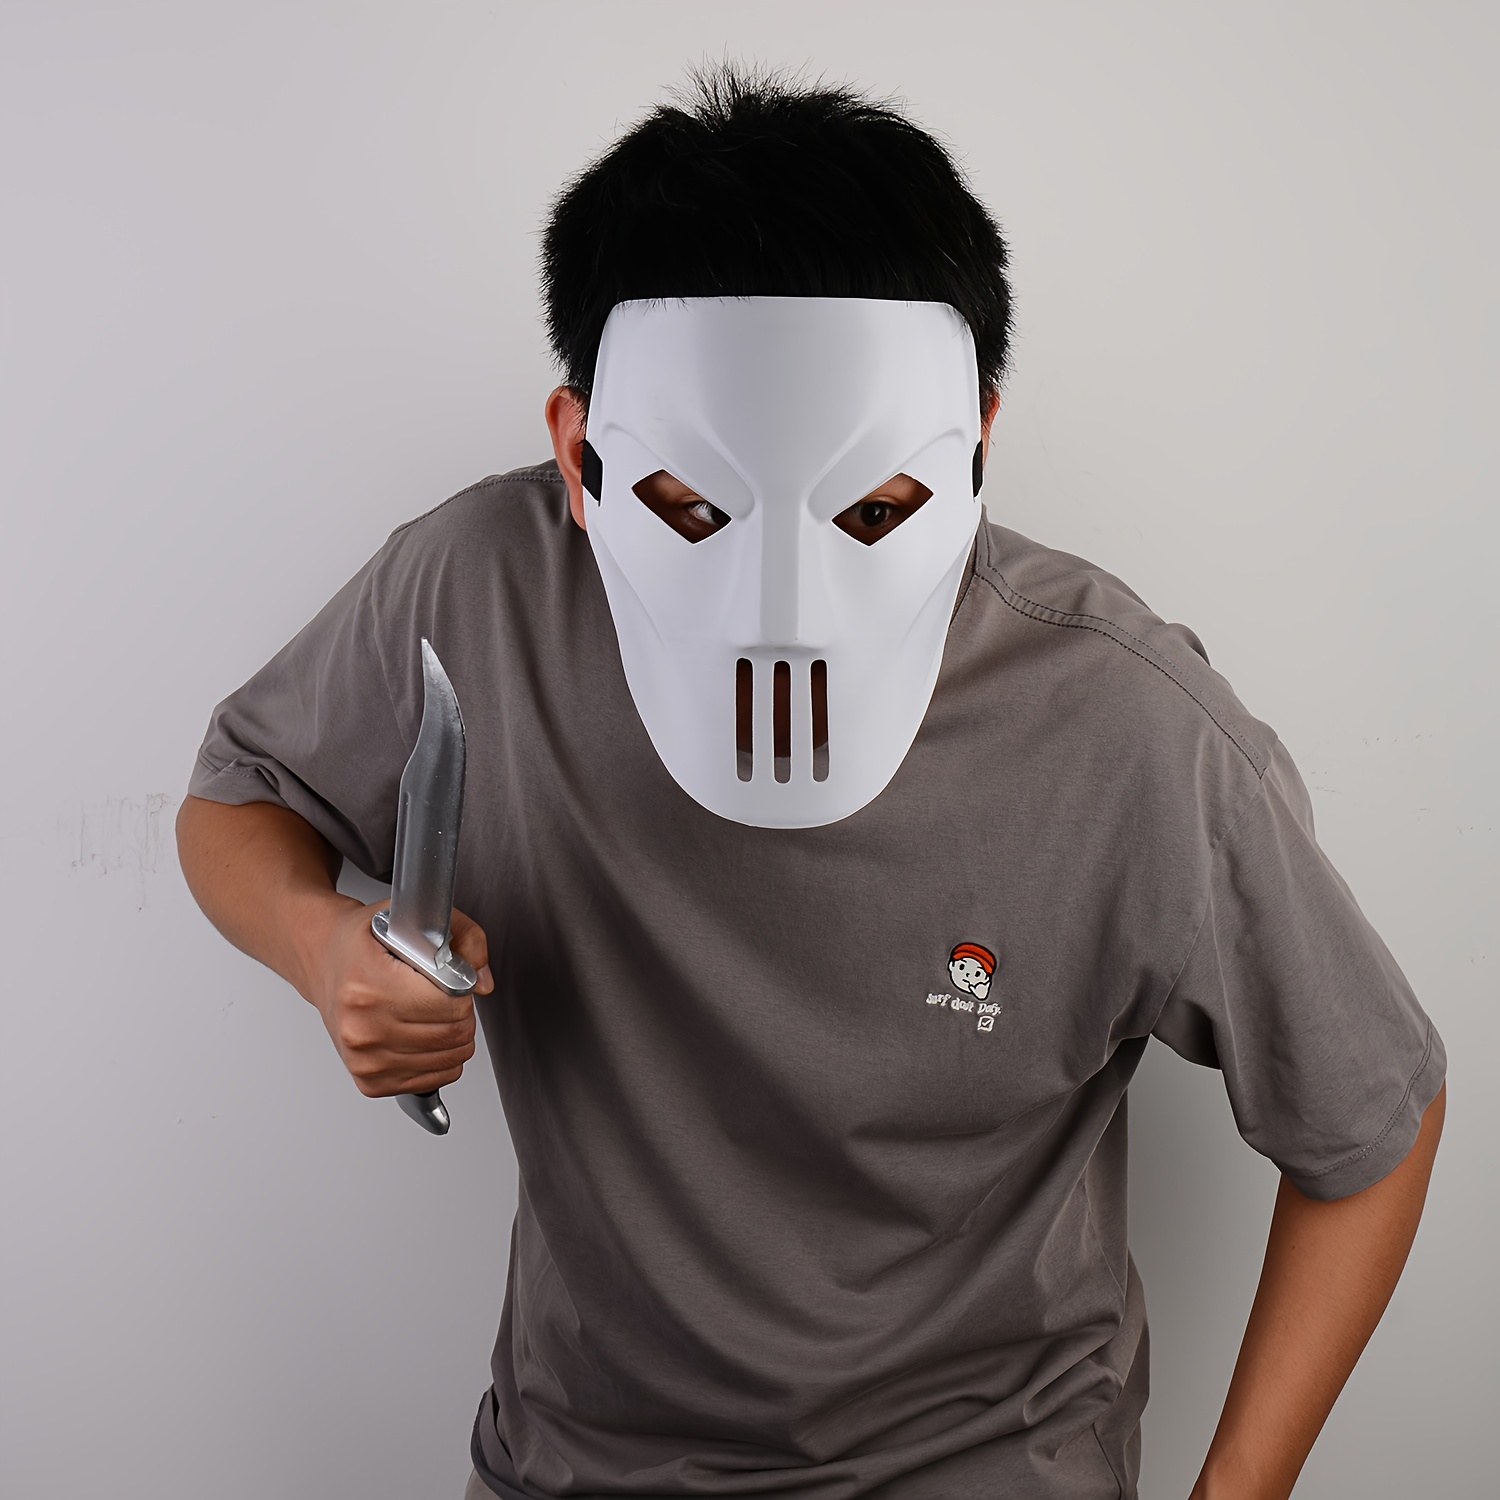 Game Character Pure White Mask Full Face Mask Dress Up Halloween ...